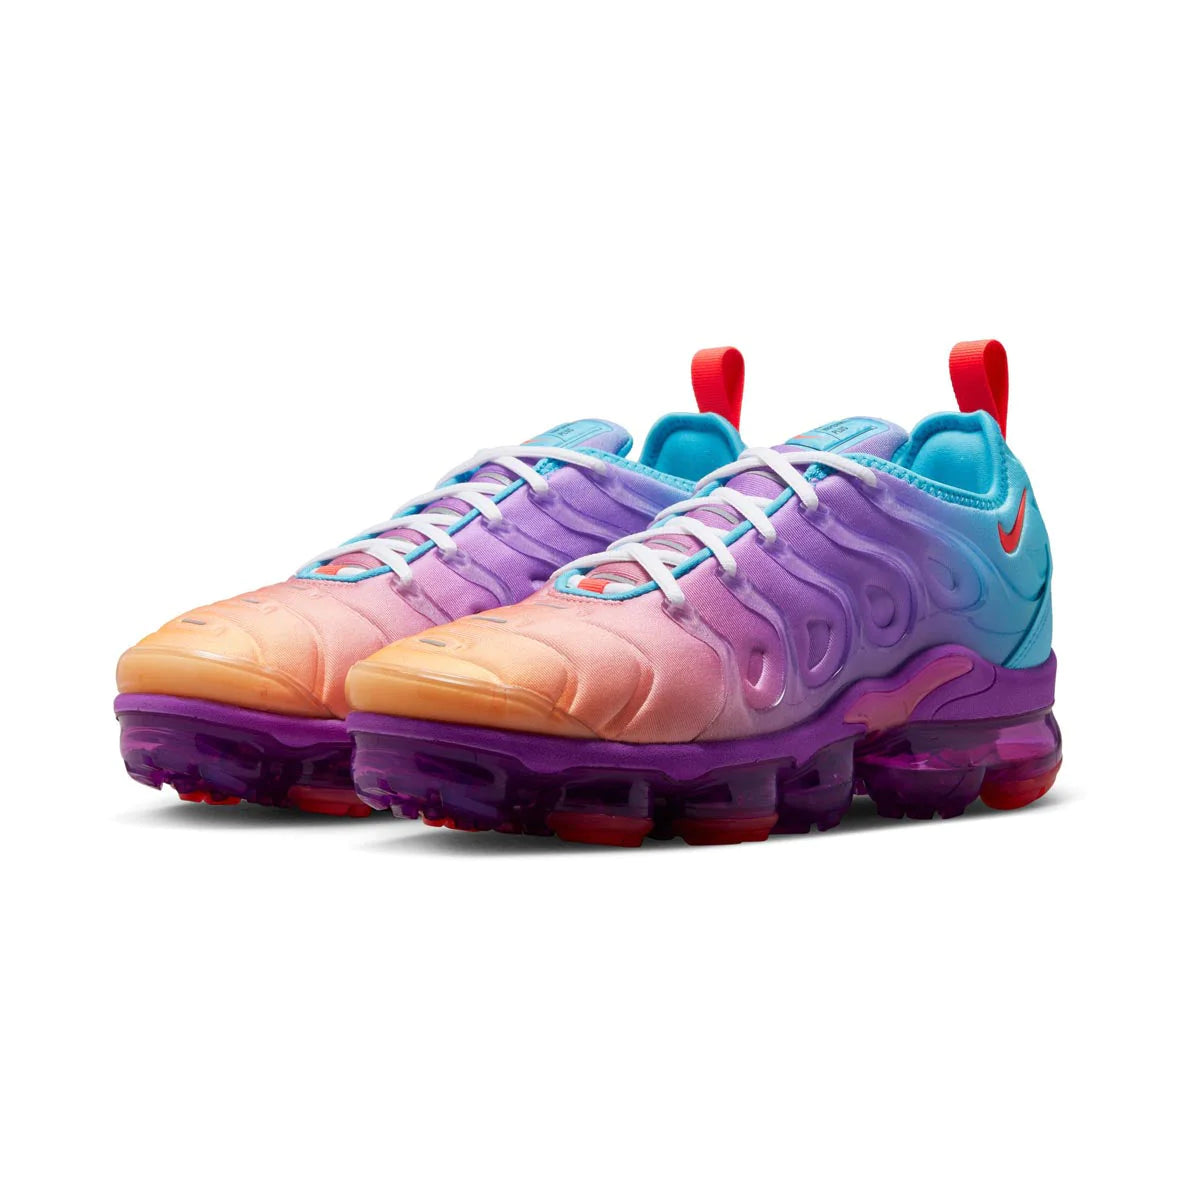 Discover the Latest Nike VaporMax Plus Sneakers - The Perfect Blend of Style and Comfort